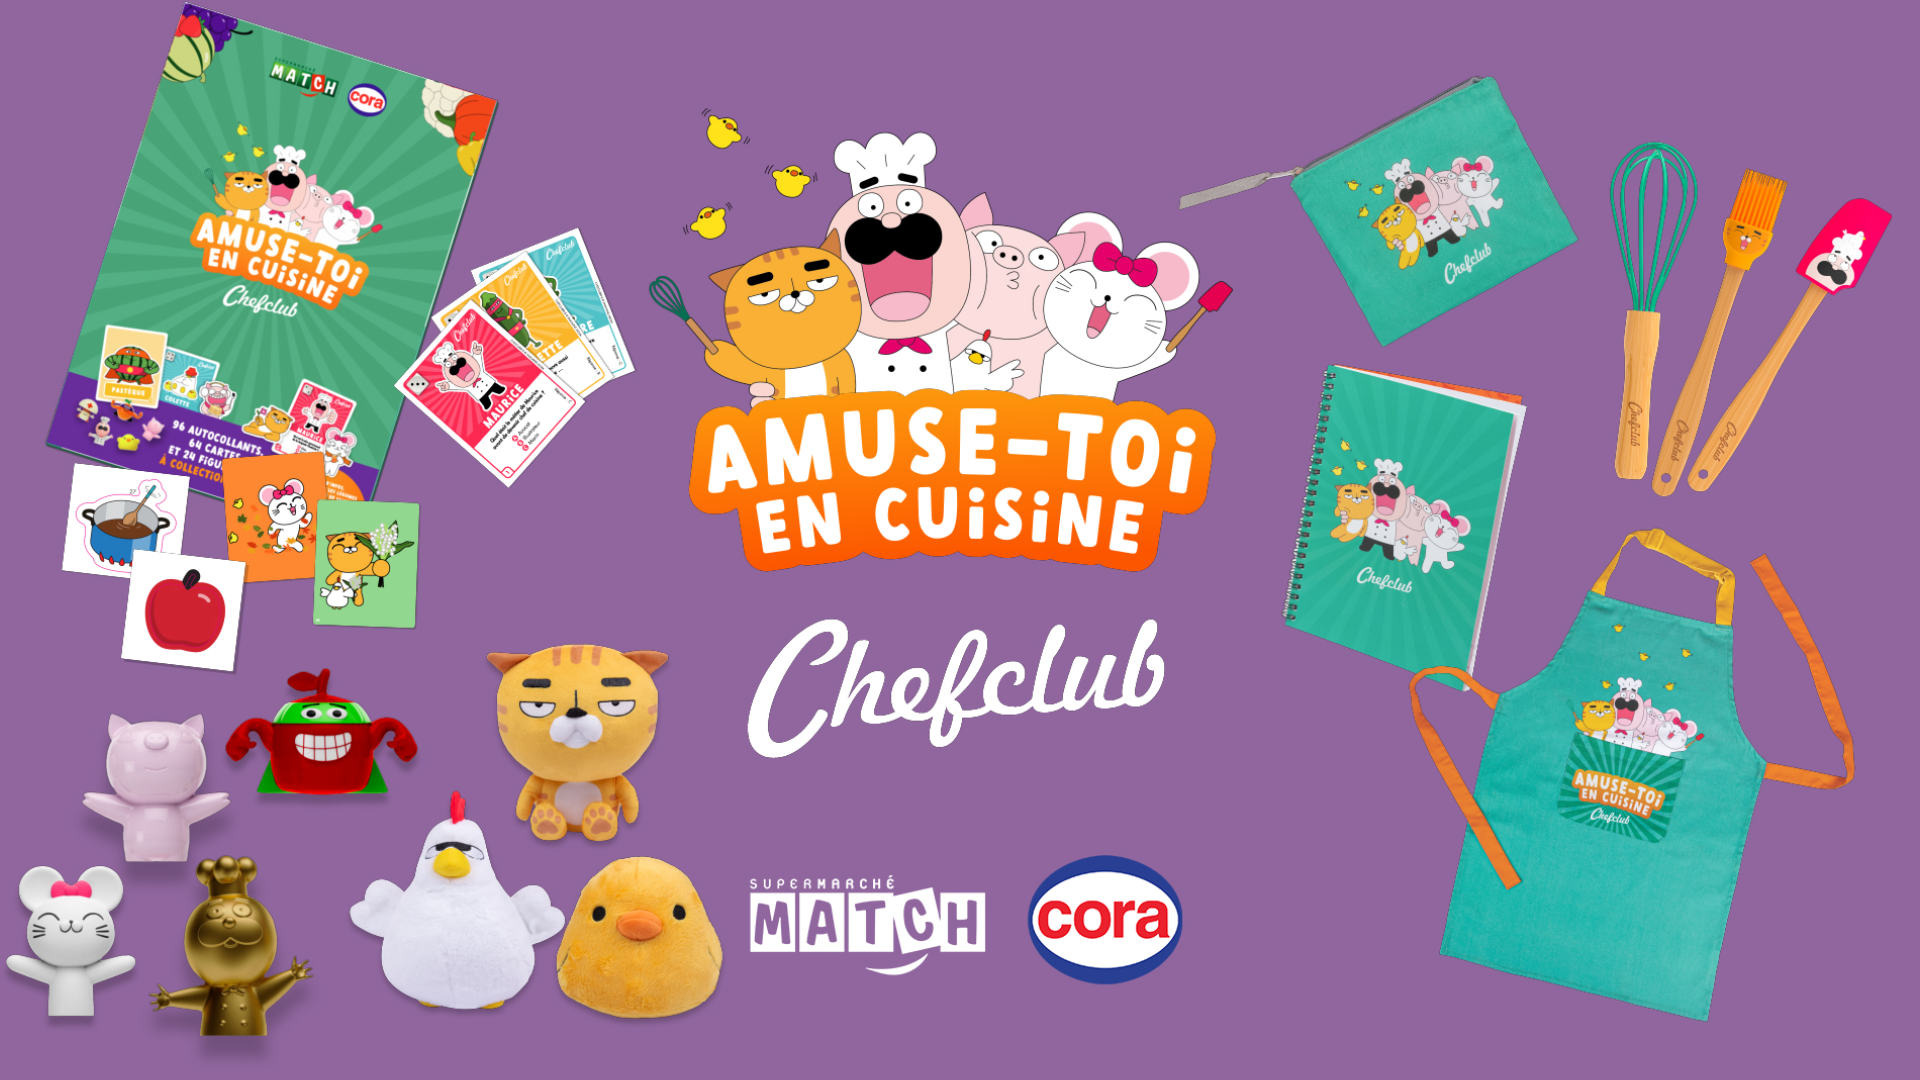 Chefclub Launches Loyalty Program in Cora and Supermarché Match in France